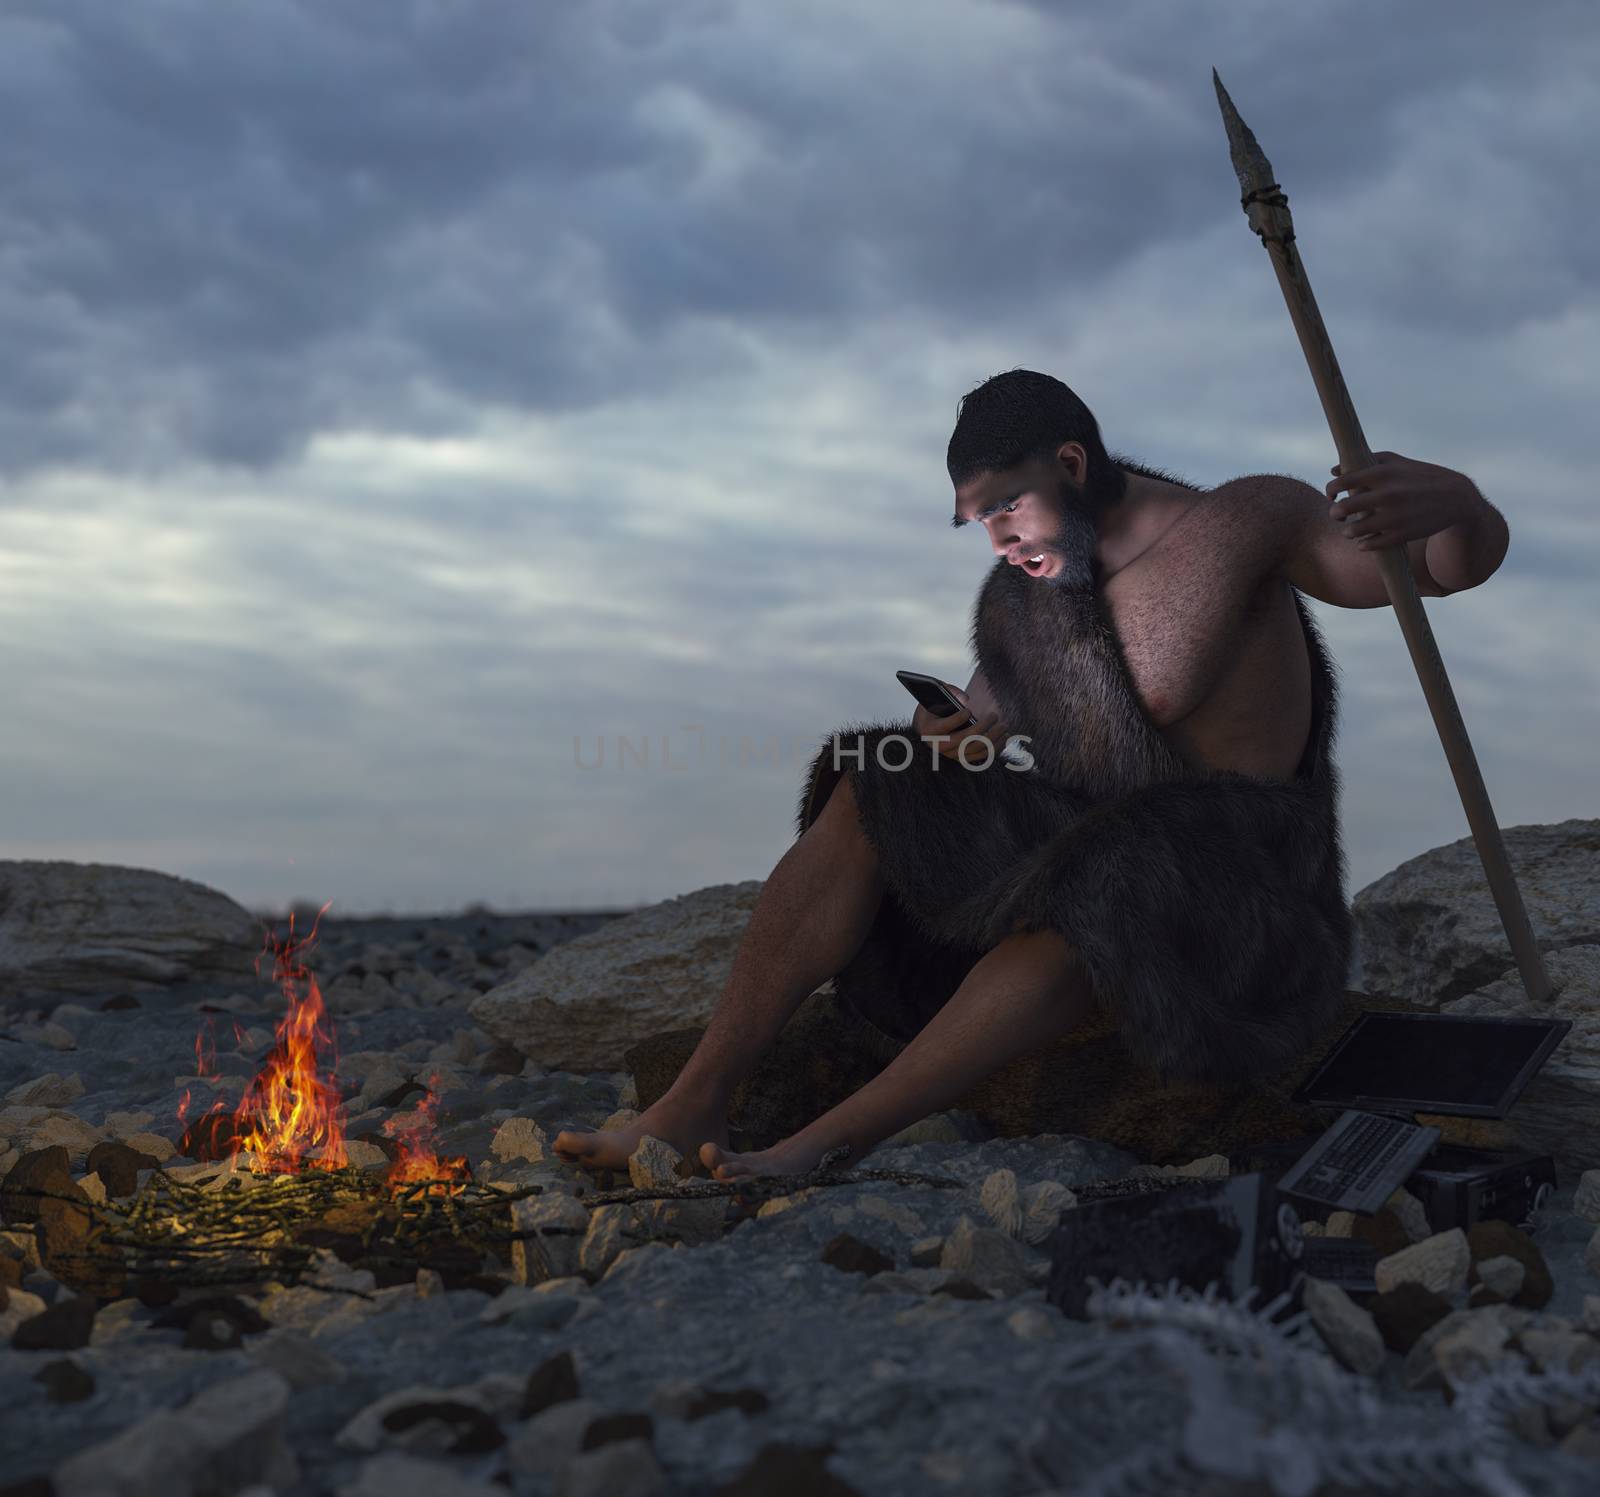 primitive man siting on the stone with smartphone concept illustration by denisgo